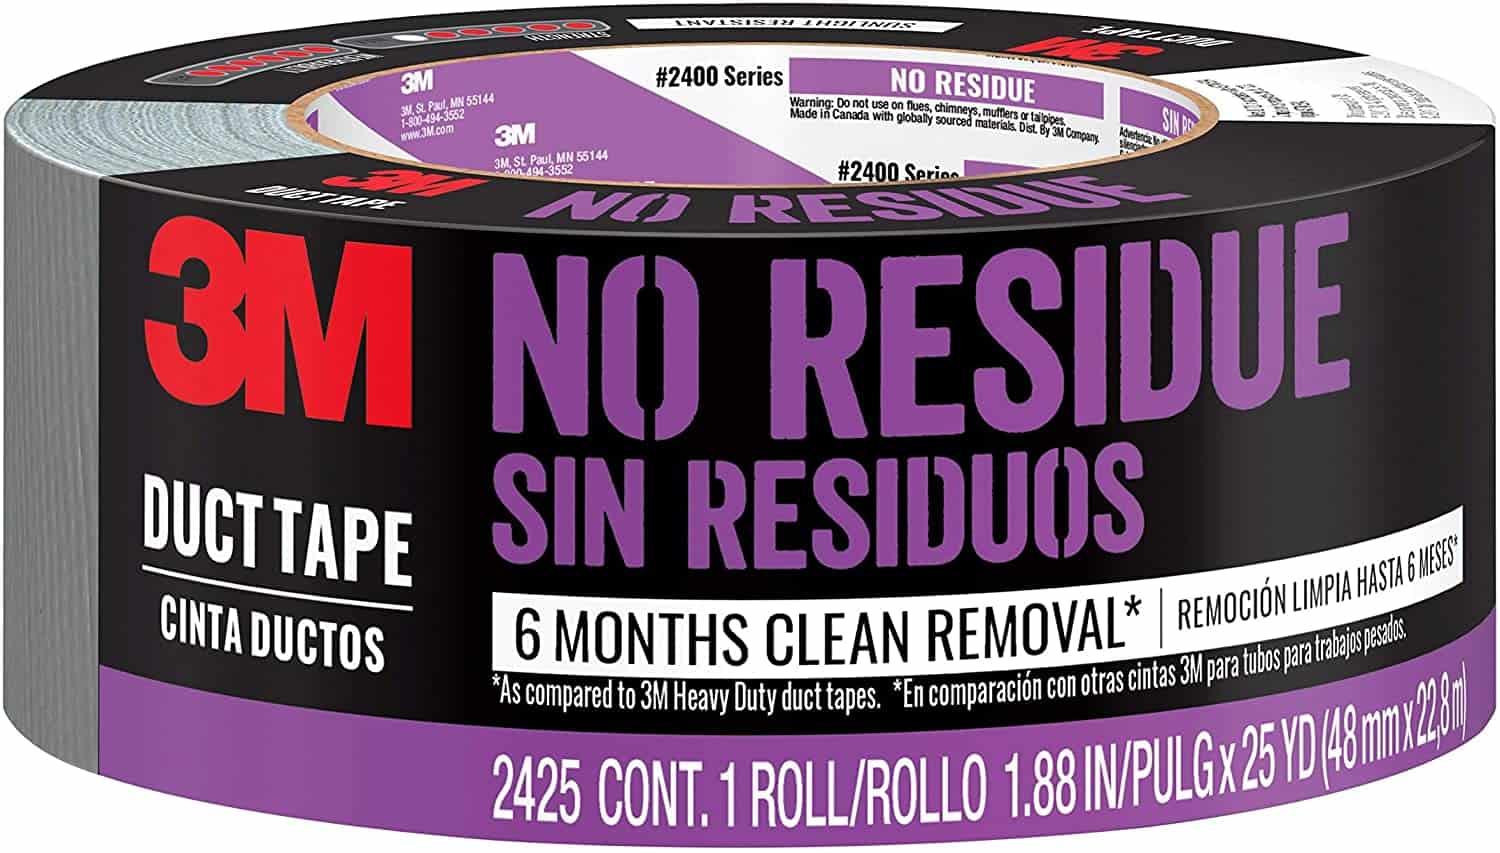 Best waterproof tape for easy removal: 3M No Residue Duct Tape